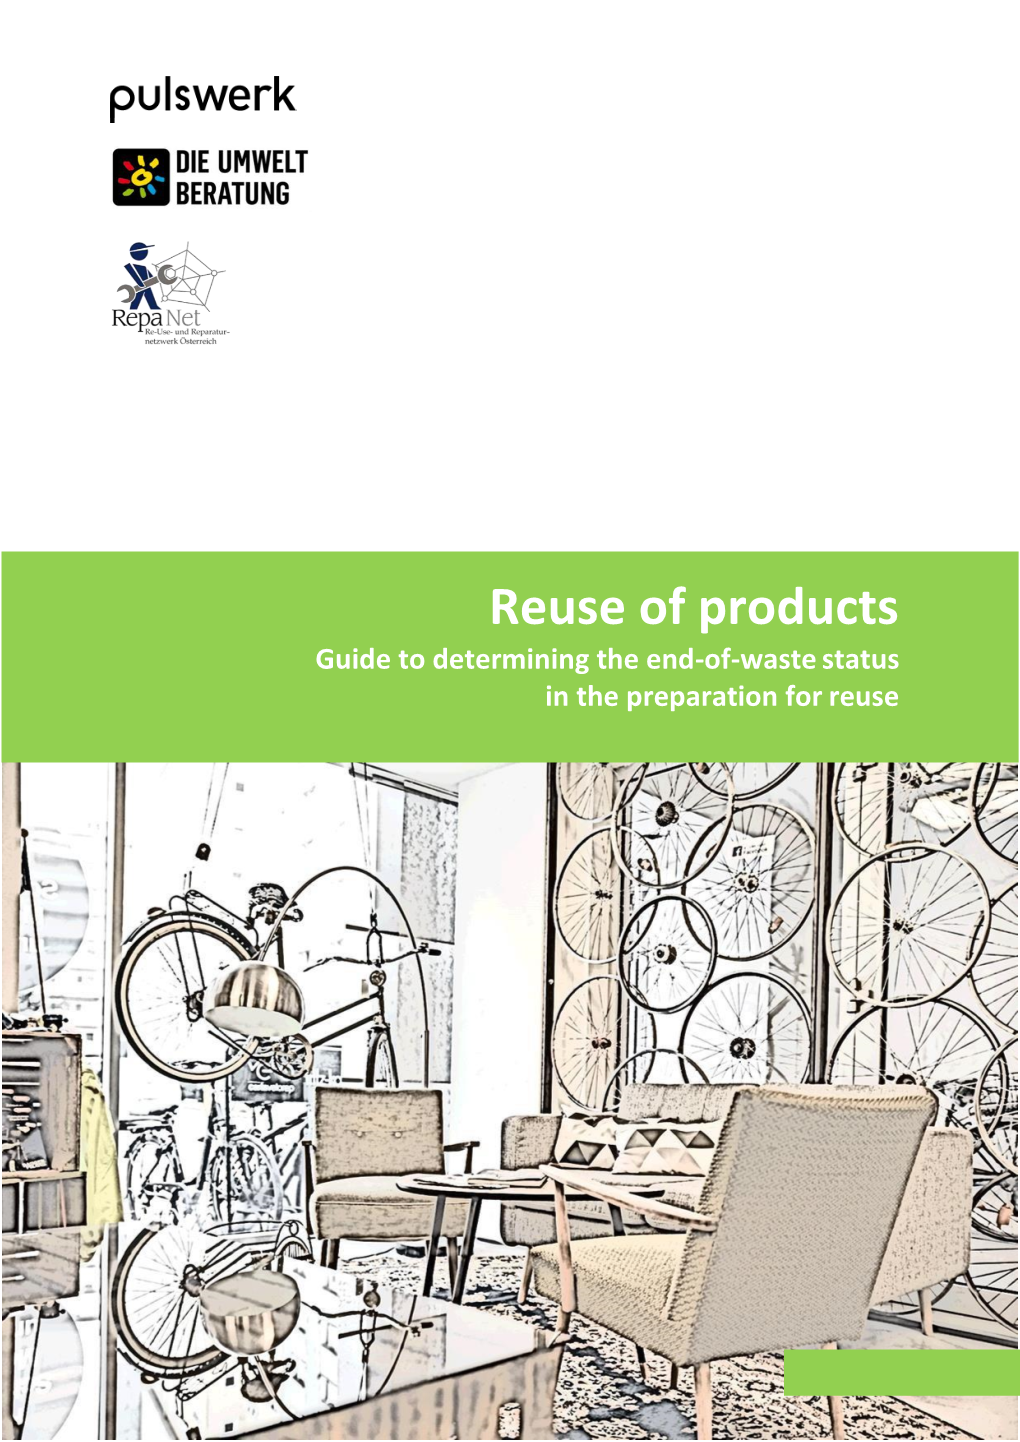 Reuse of Products Guide to Determining the End-Of-Waste Status in the Preparation for Reuse